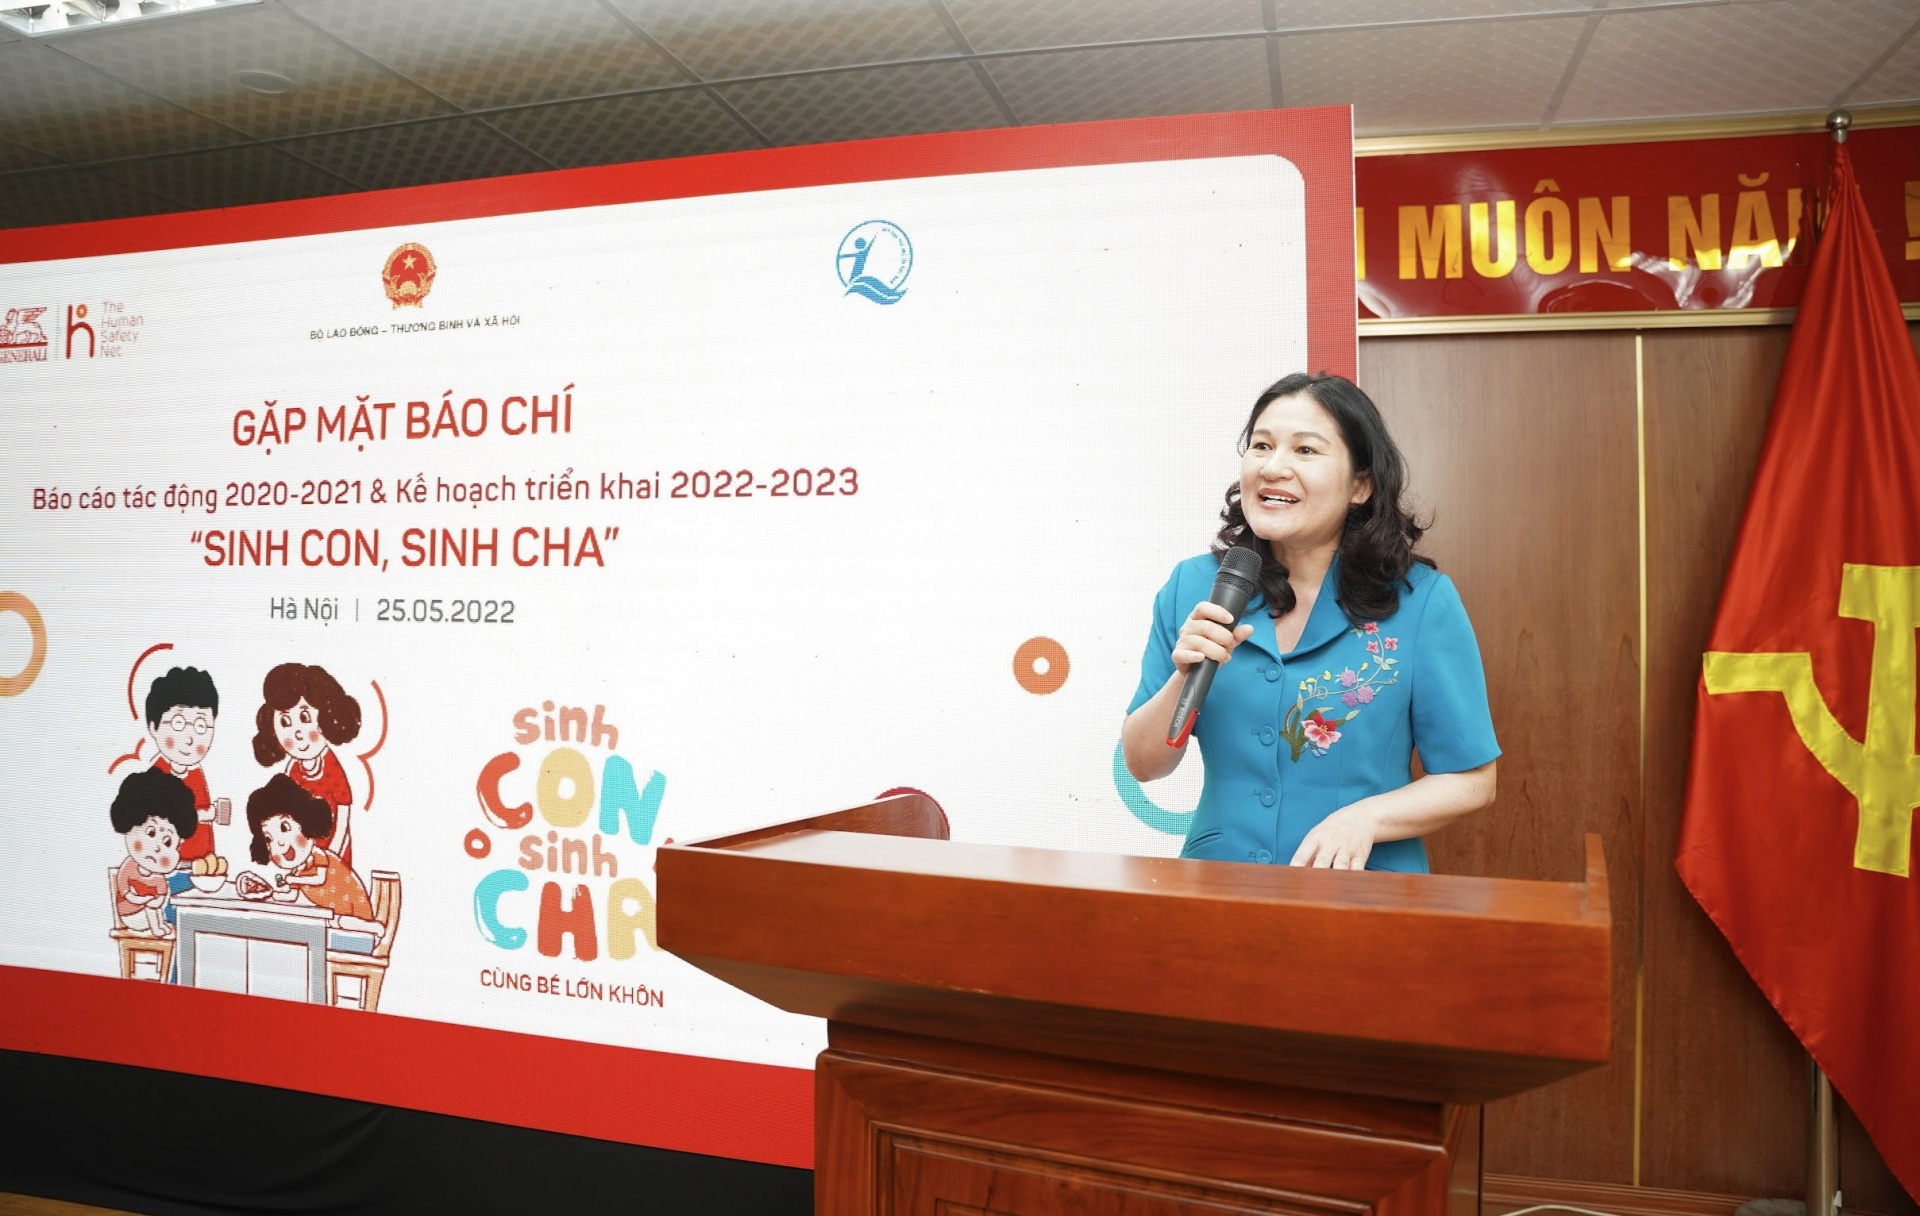 Impact of Sinh Con, Sinh Cha community education campaign unveiled